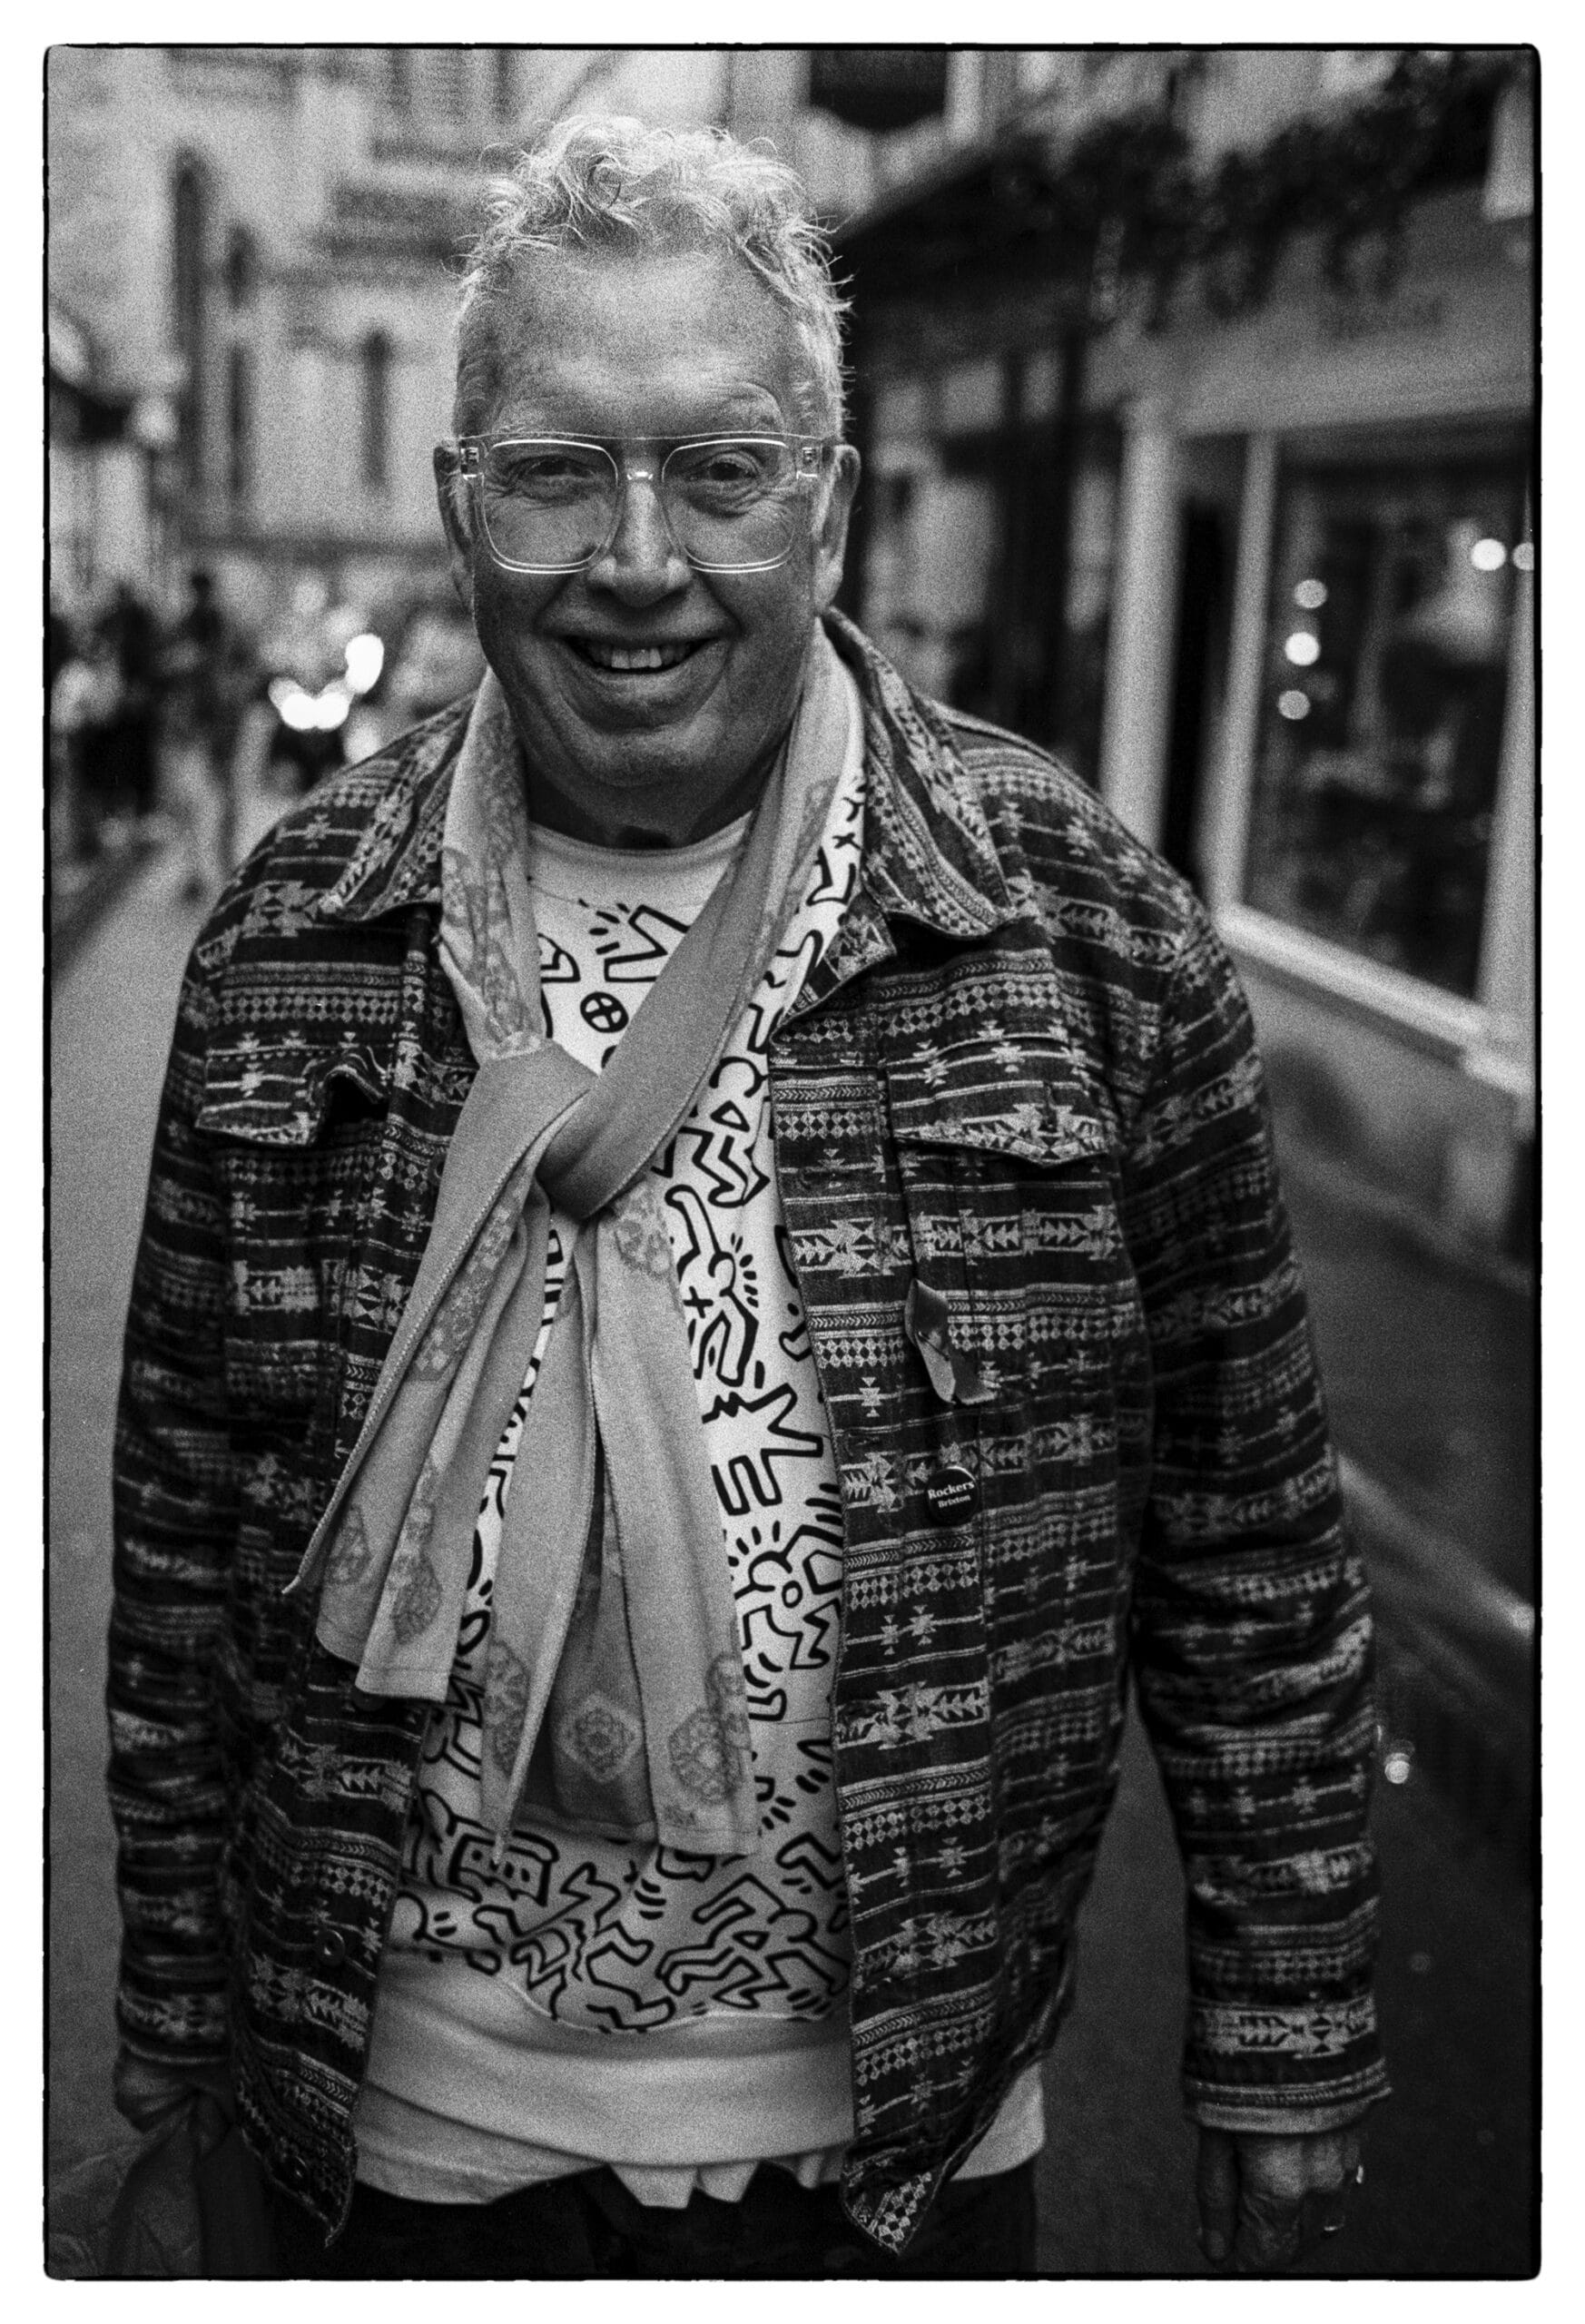 Ted: "Show them my Keith Haring jumper. My generation fought for this freedom" // 📸 : David Collyer